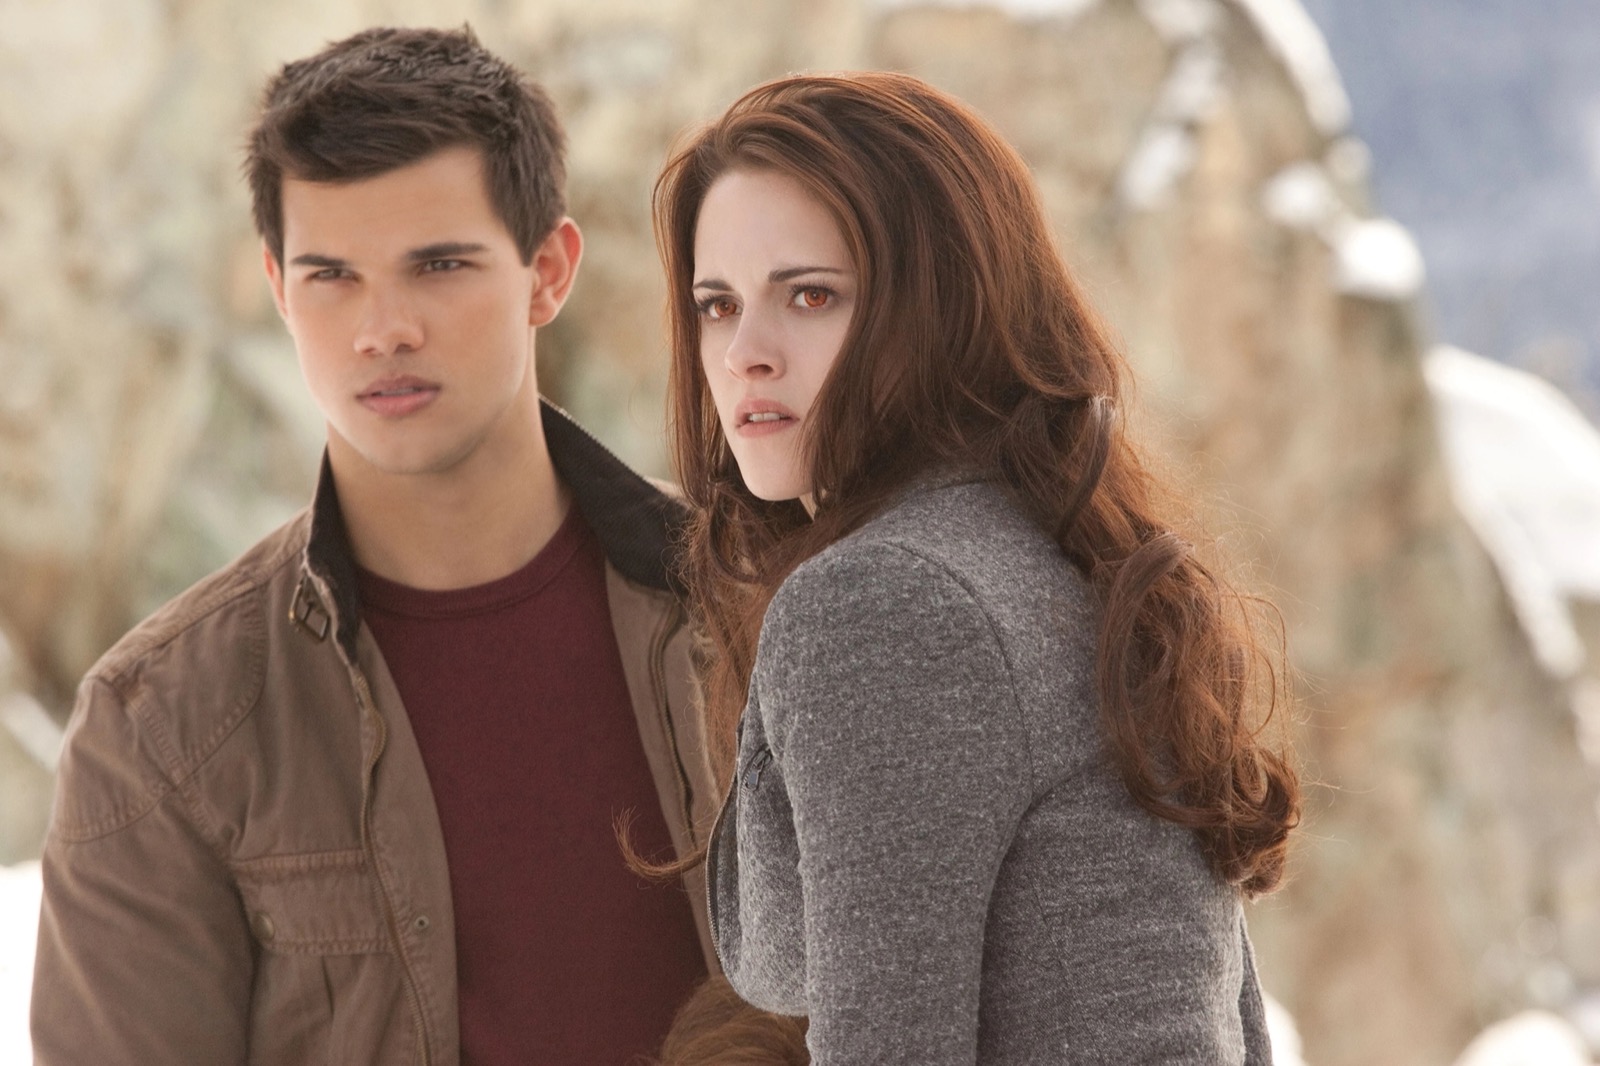 Let’s See How Much Random Trivia You Reallllly Know. Can You Get 18/24 on This Quiz? Twilight Saga